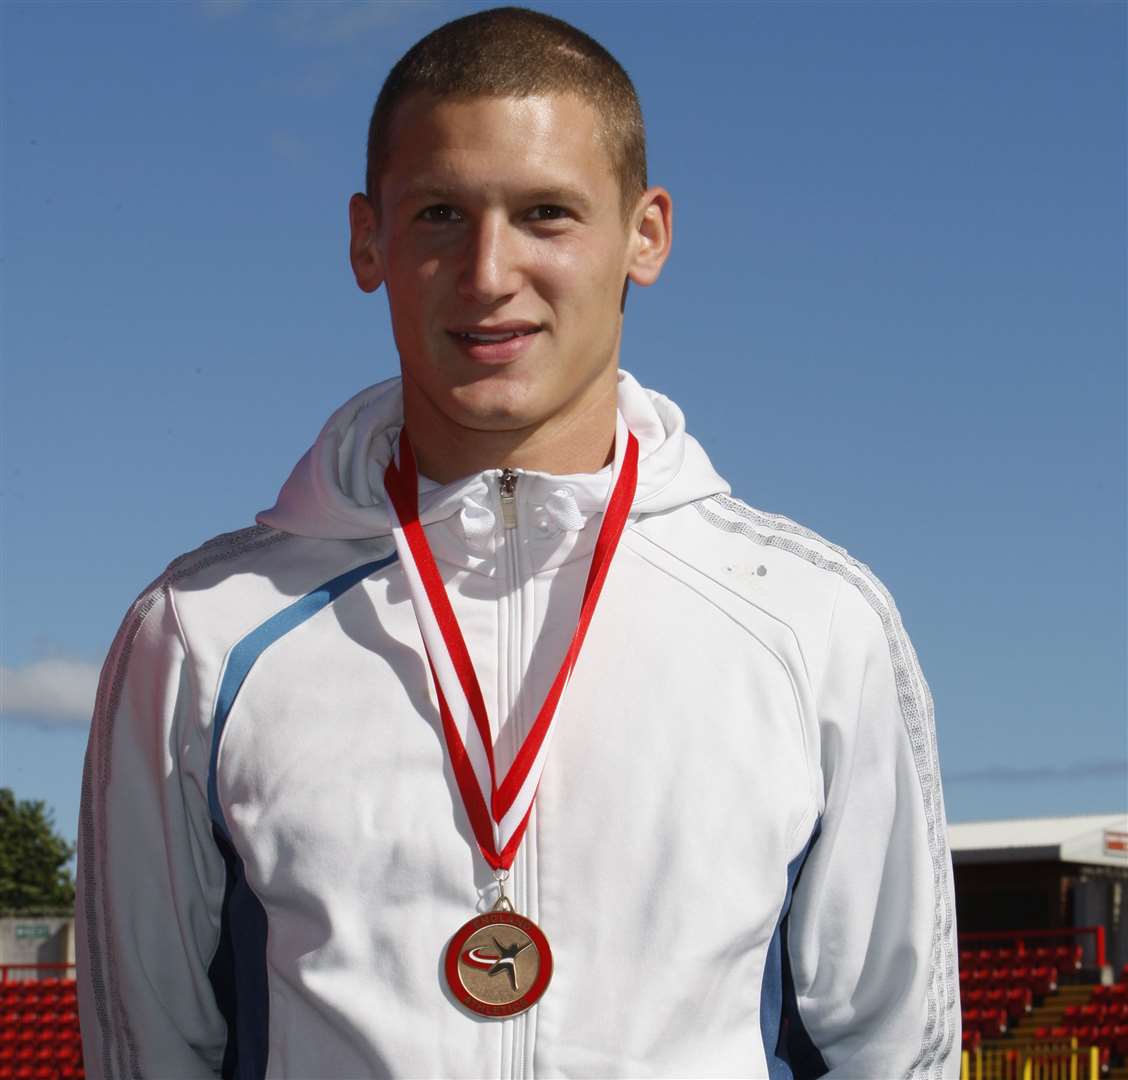 Matt represented England in the triple jump and dreamt of competing at the Olympics